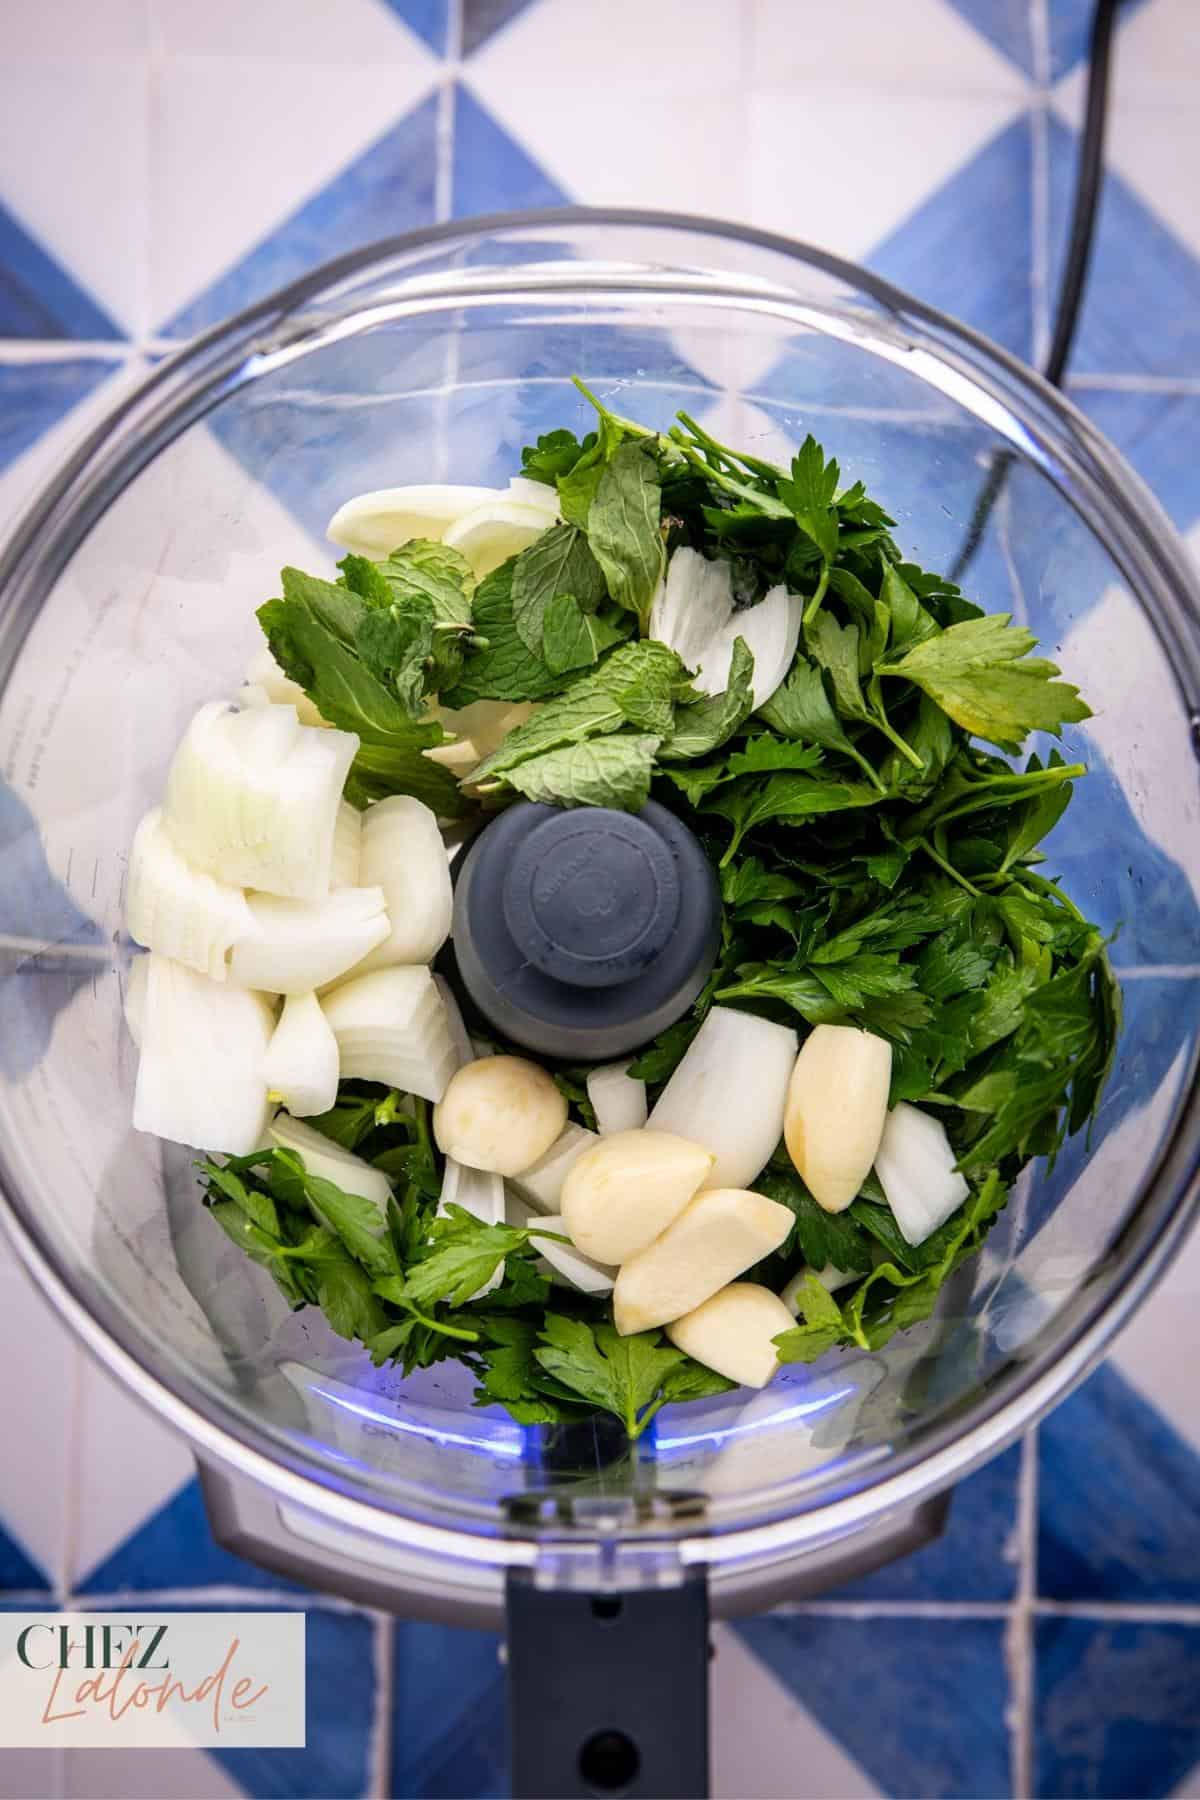 In a 16-cup food processor, combine your chopped onion, garlic cloves, mint leaves, and 2 cups of Italian flat-leaf parsley.